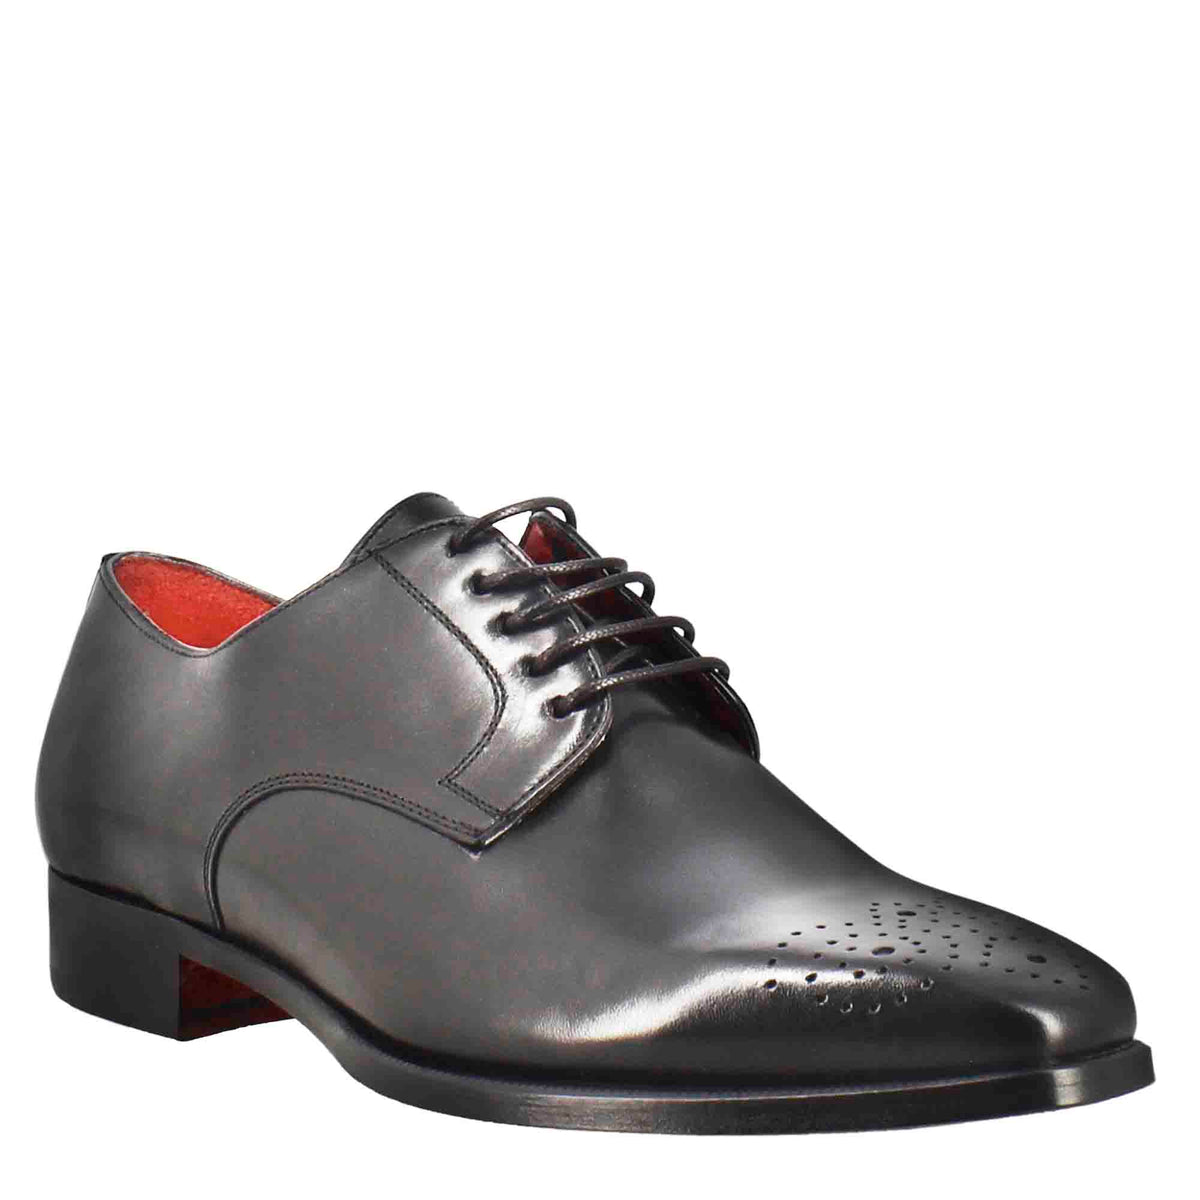 Men's Derby in smooth black leather with square toe and design